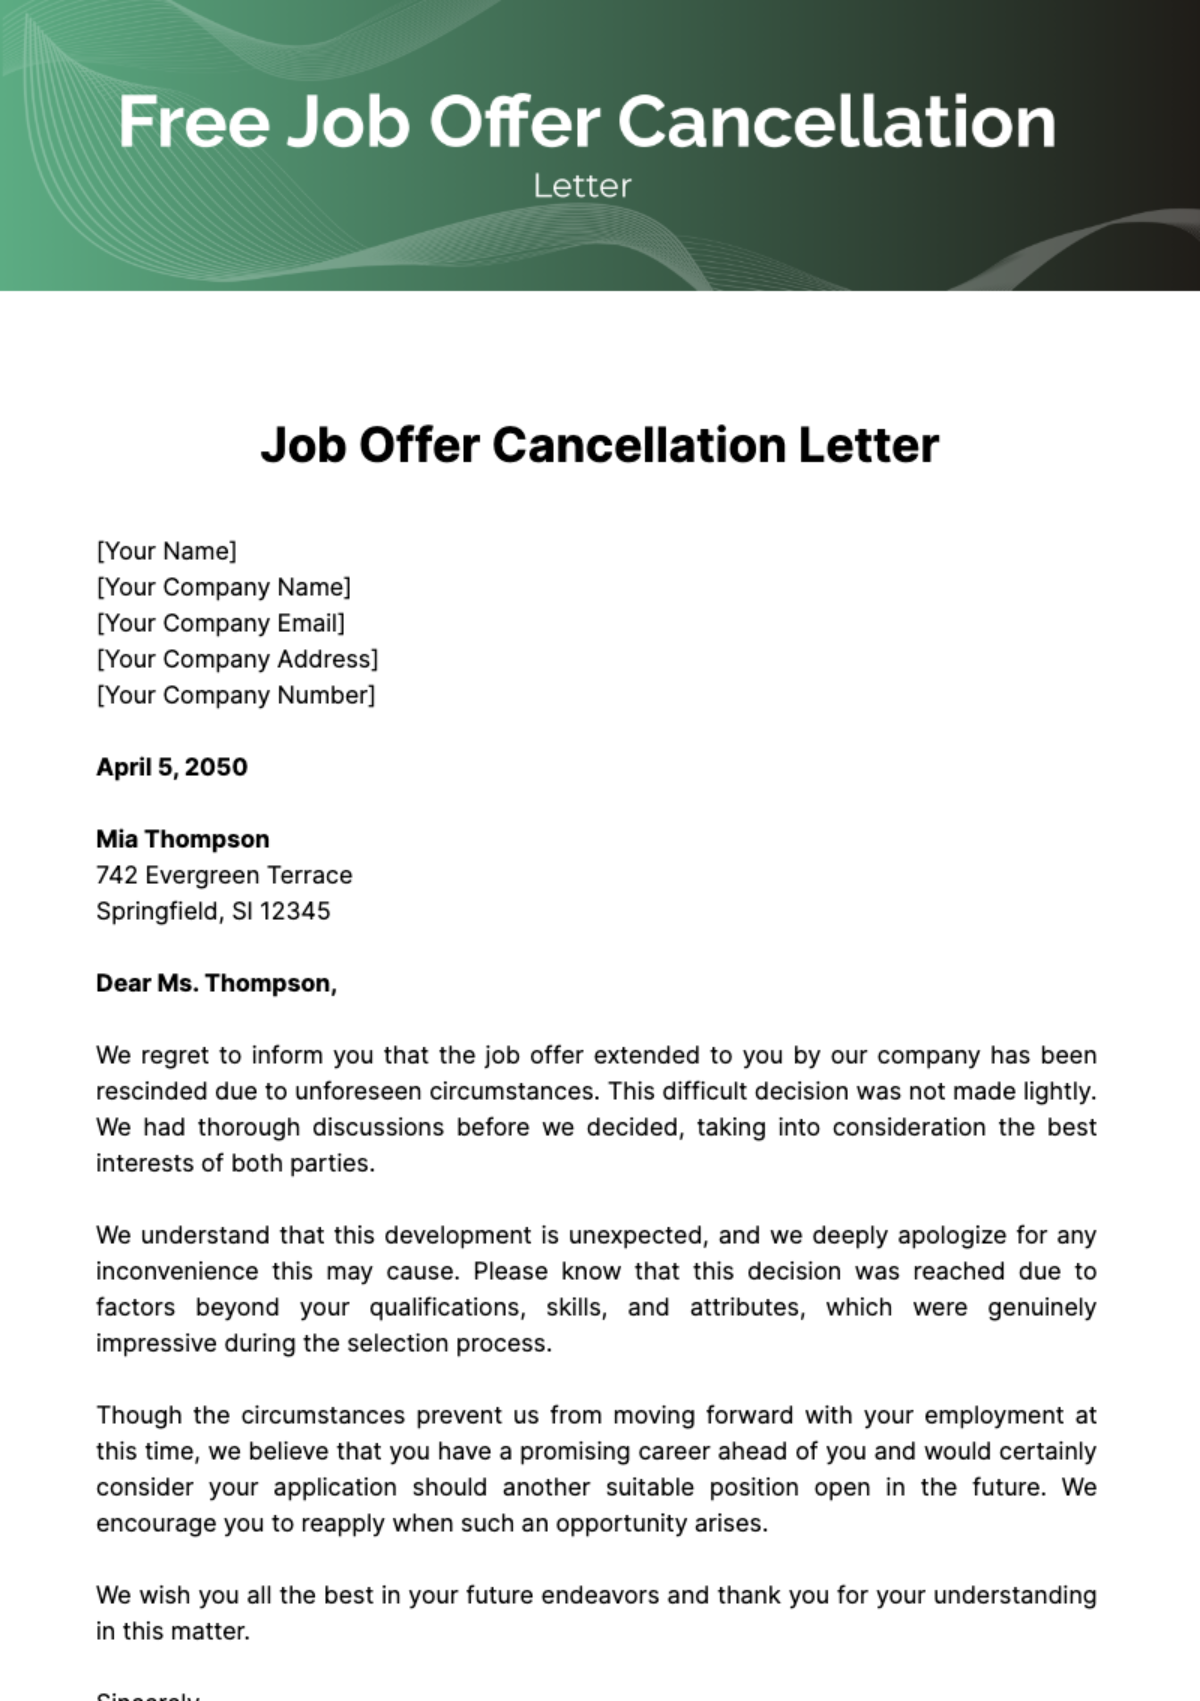 Free Job Offer Cancellation Letter Template